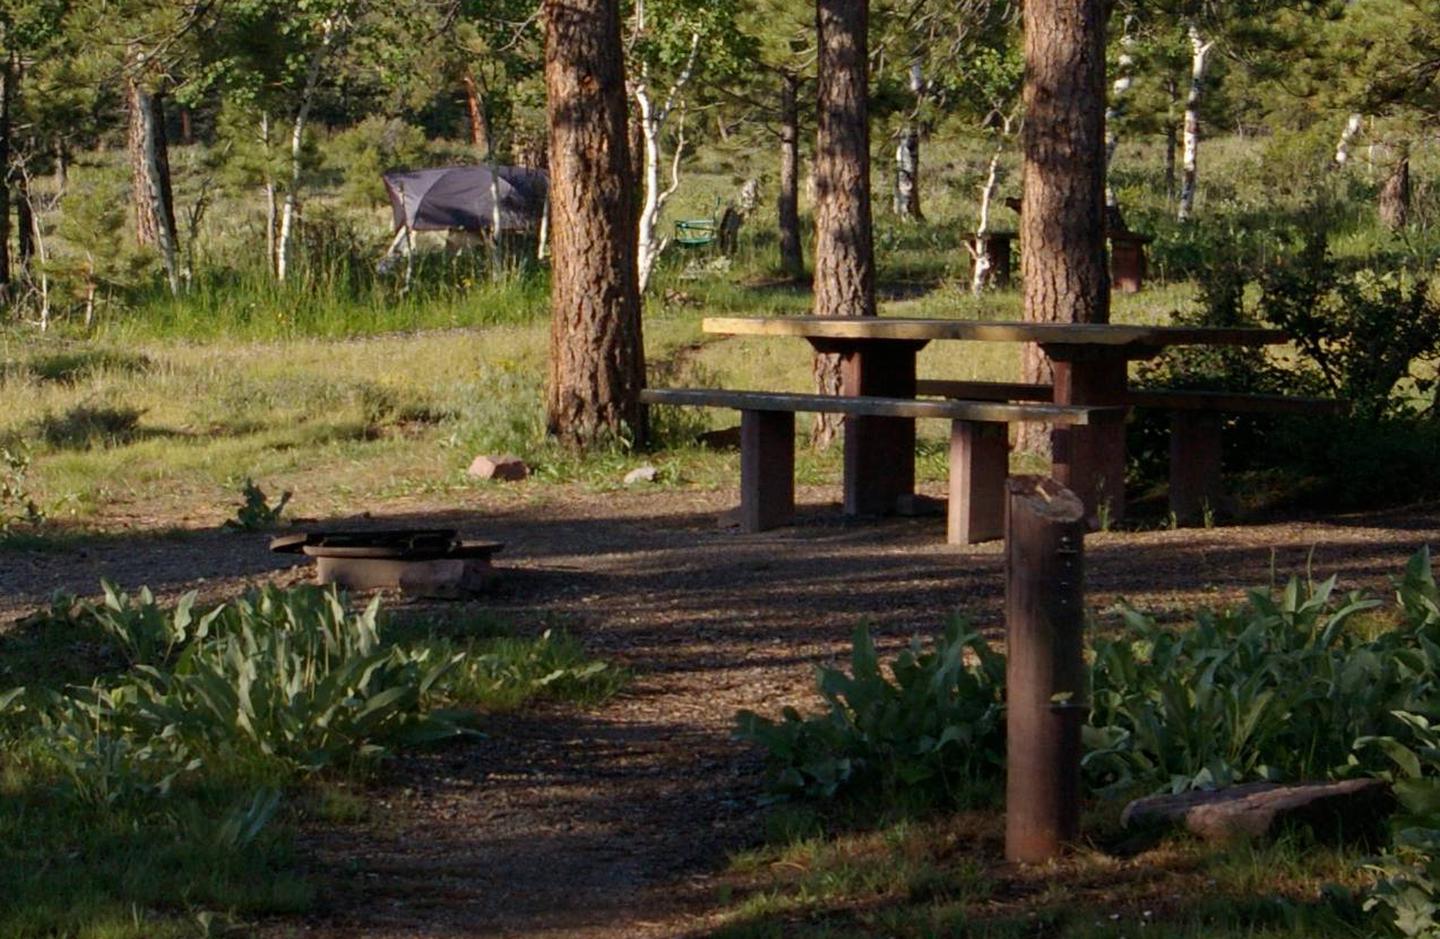 This site is has a tent set up in the background. There is a picnic table and fire pit in the non-grassy area. This site offers some shade.Canyon Rim Campground